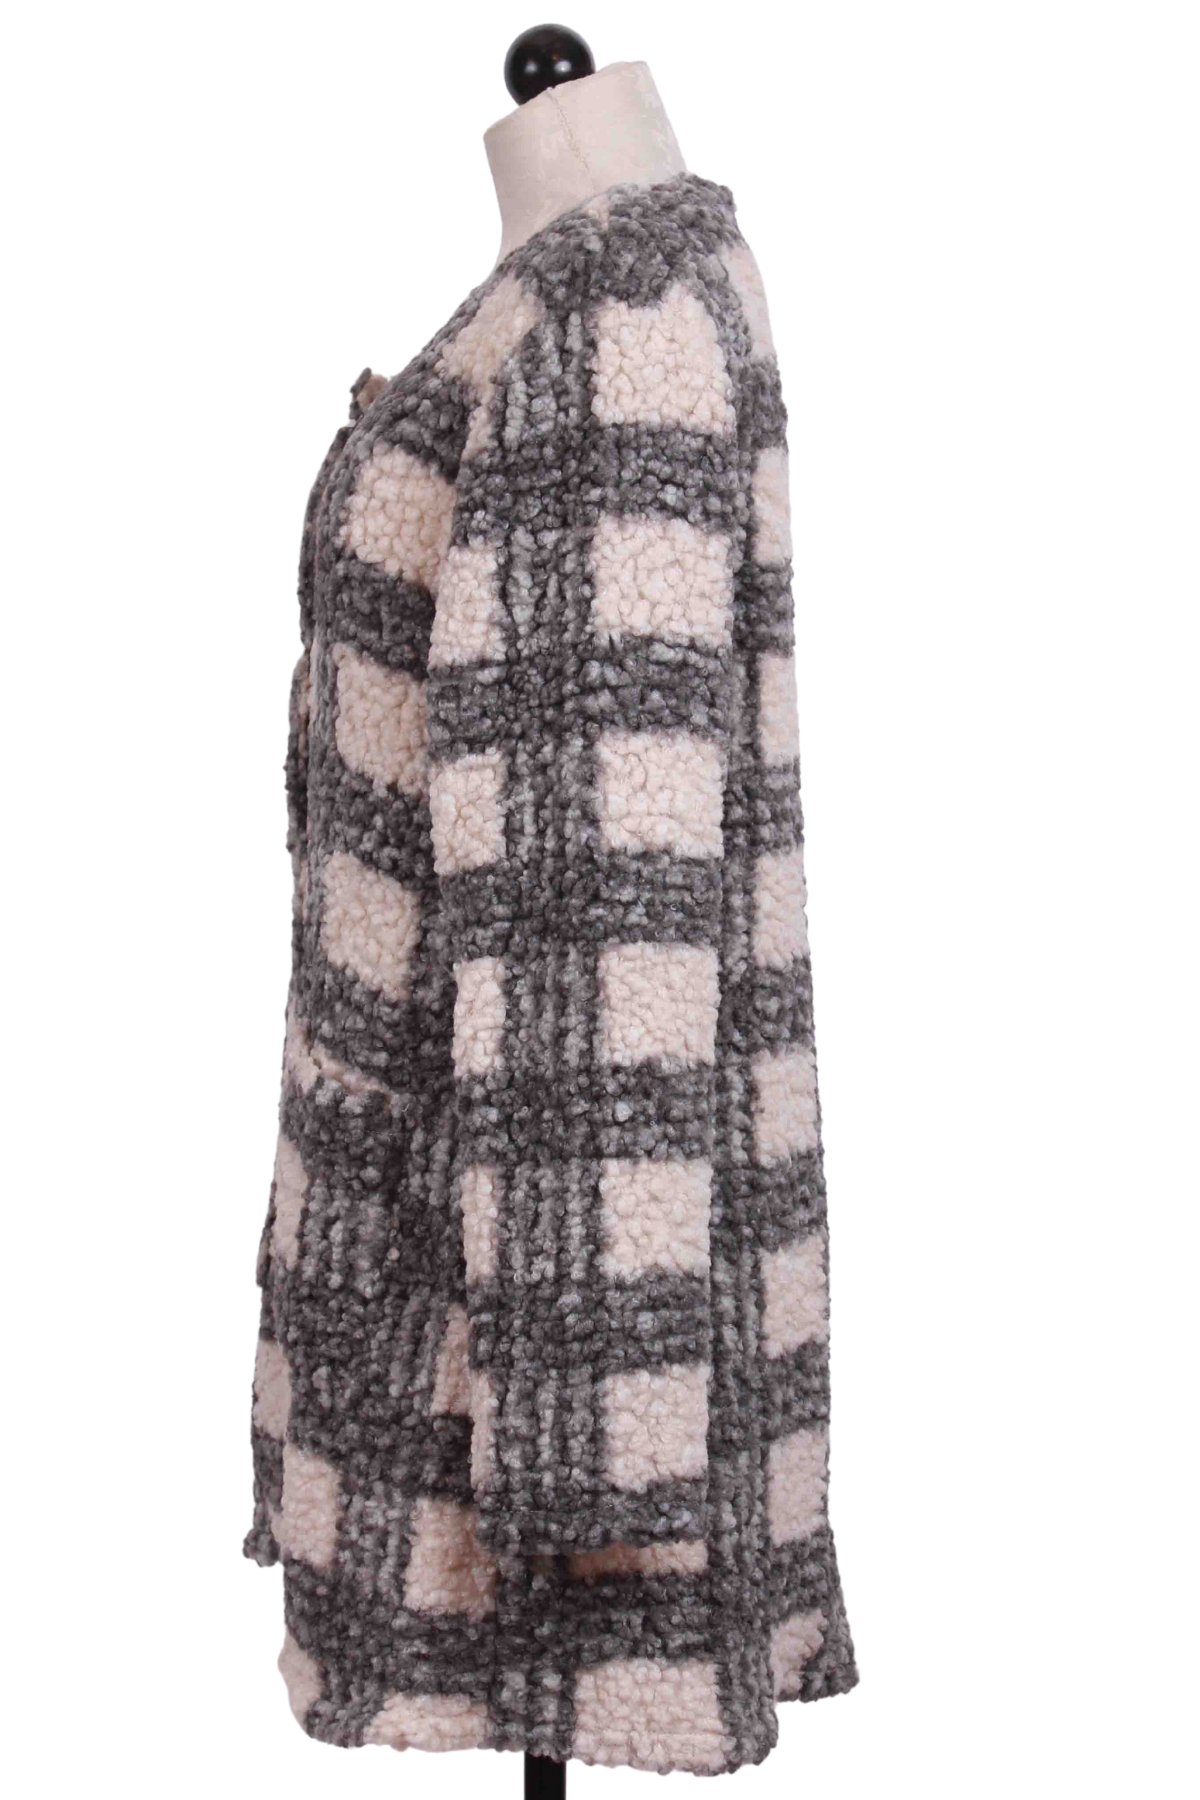 side view of Cream and Gray Snap Front Sherpa Plaid Jacket by Radzoli